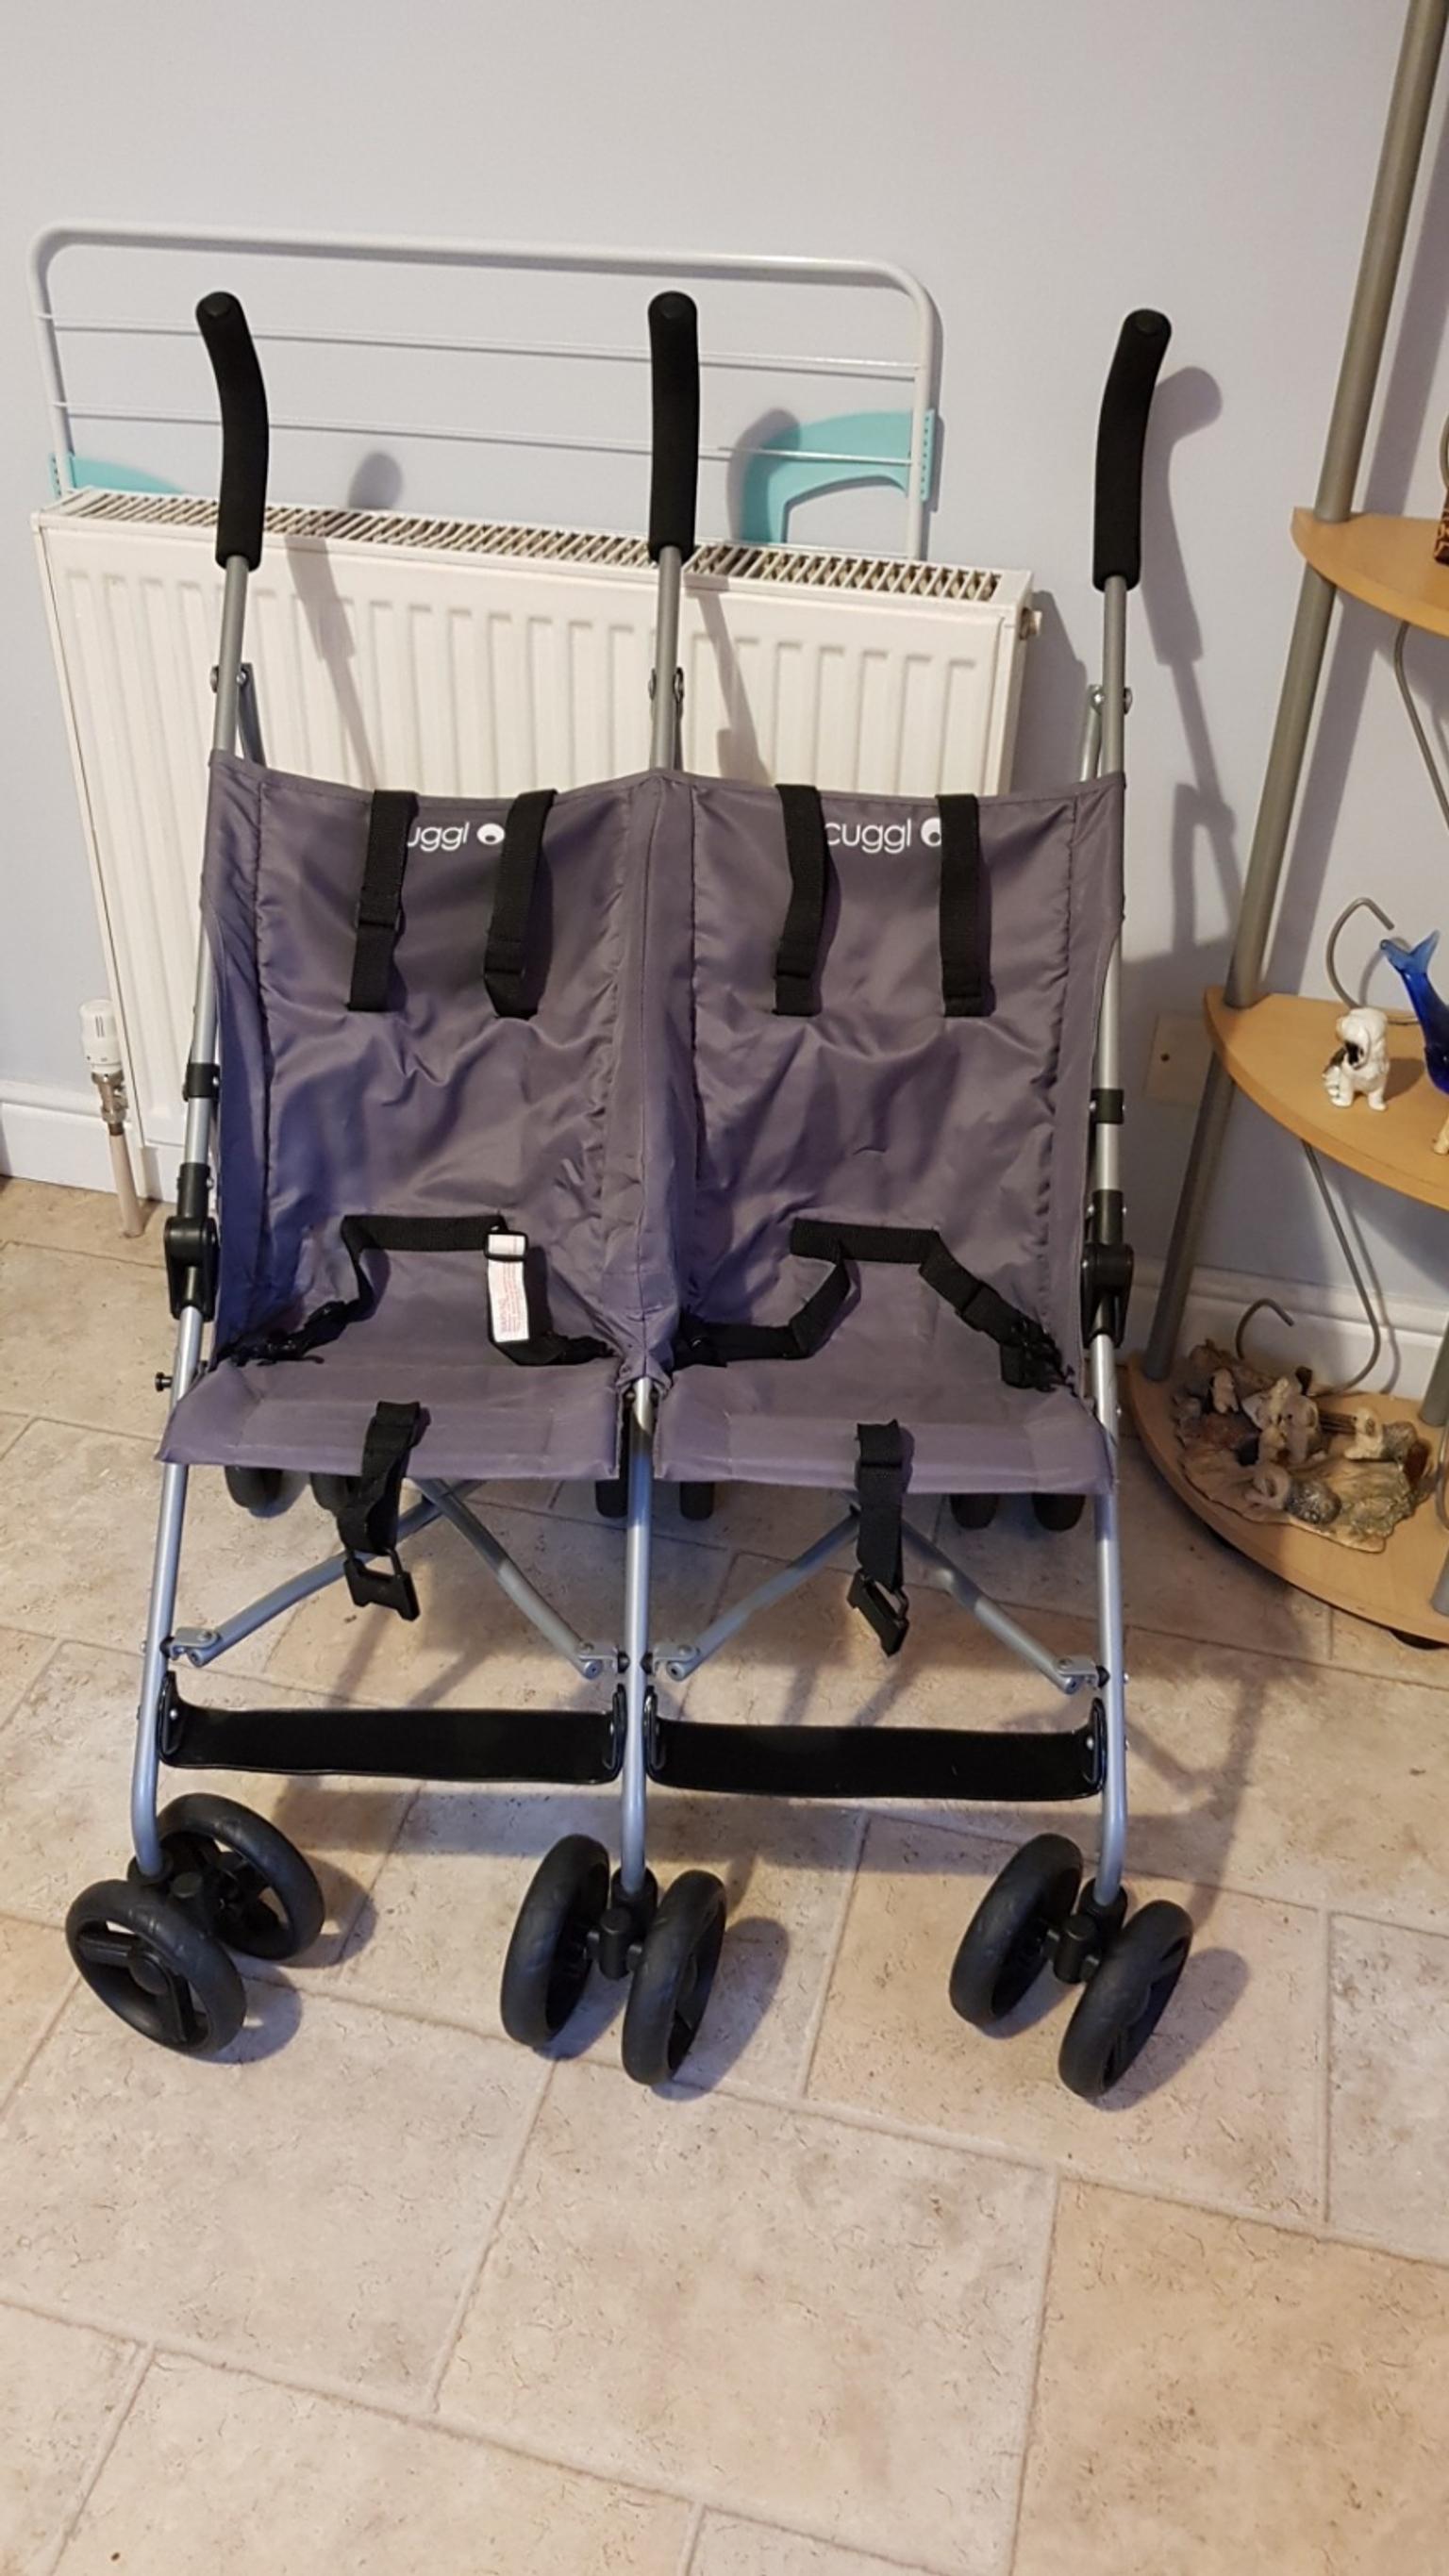 cuggl double pushchair